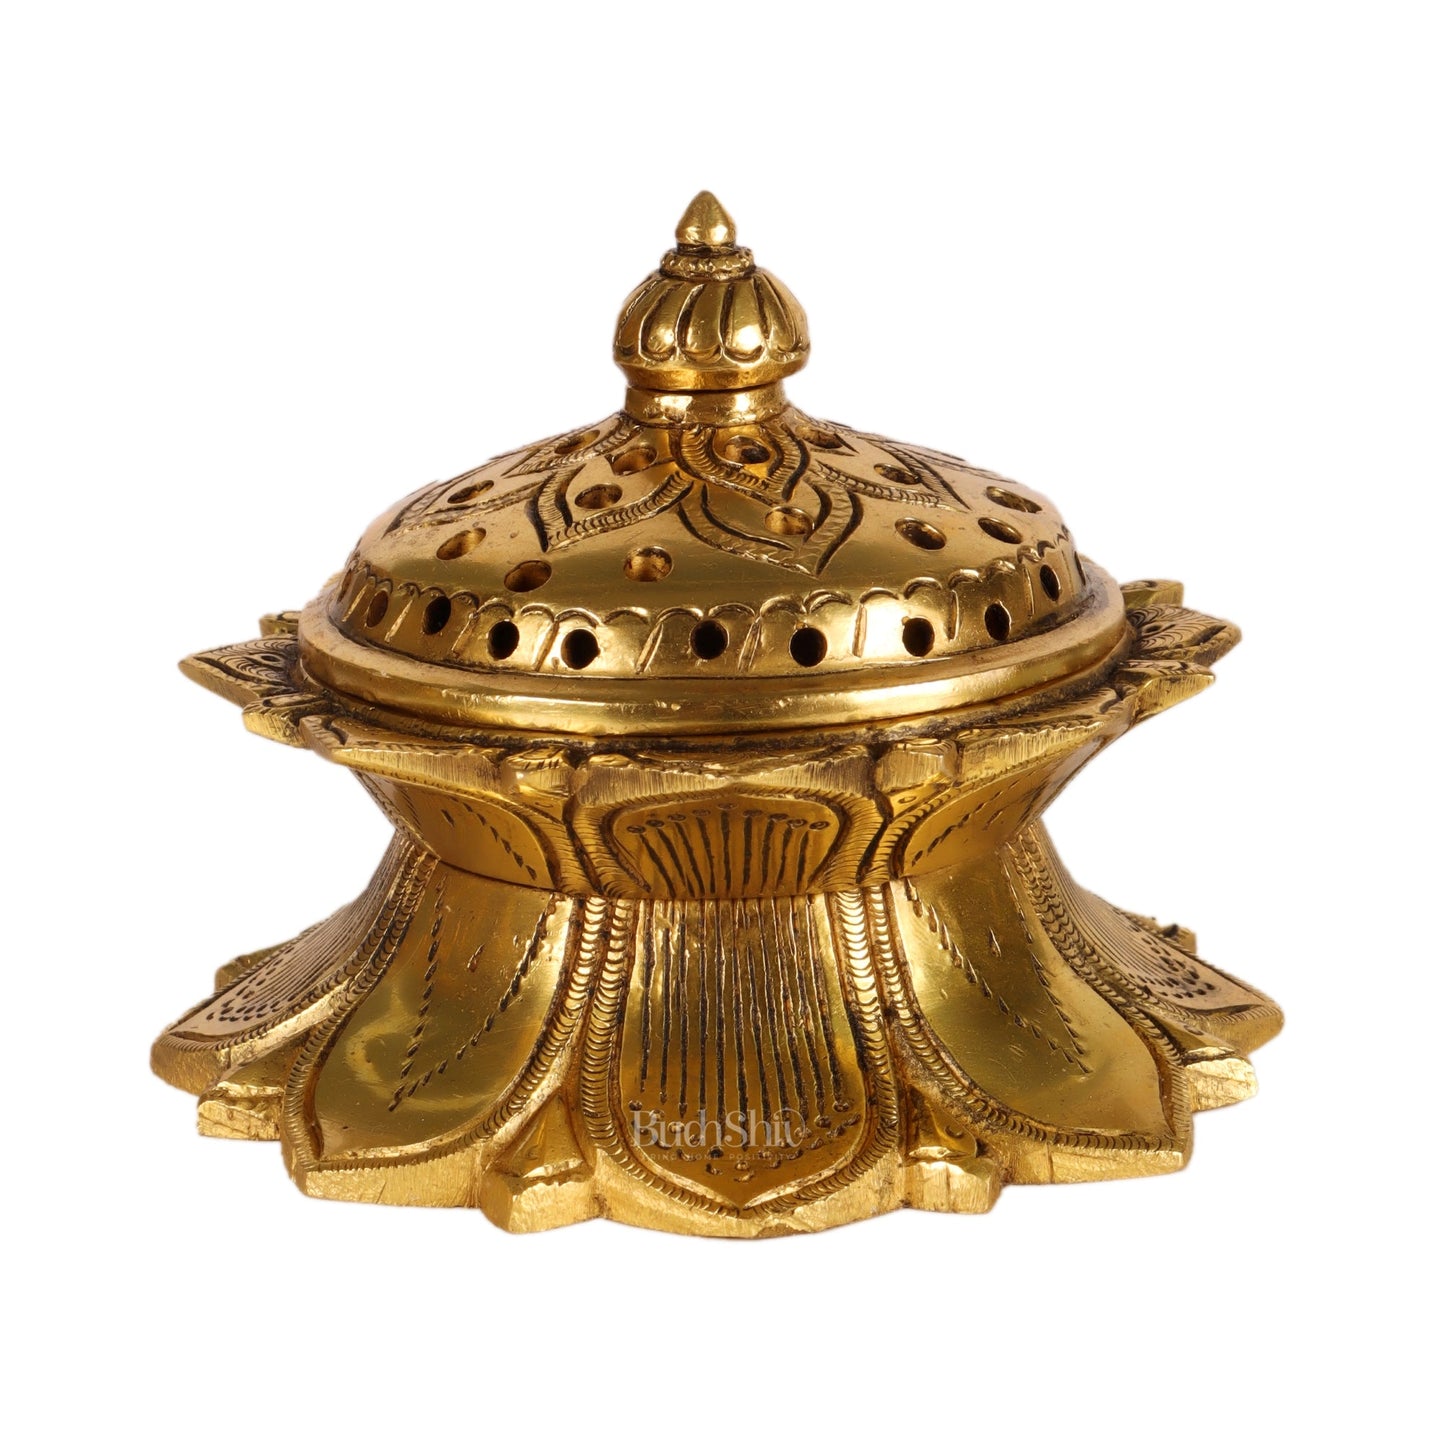 Brass Handmade Lotus Design Lobaandaani | Dhoop Burner and Incense Charcoal Burner with Lid | Height 3.5 inches, Width 4 inches, Depth 4 inches - Budhshiv.com